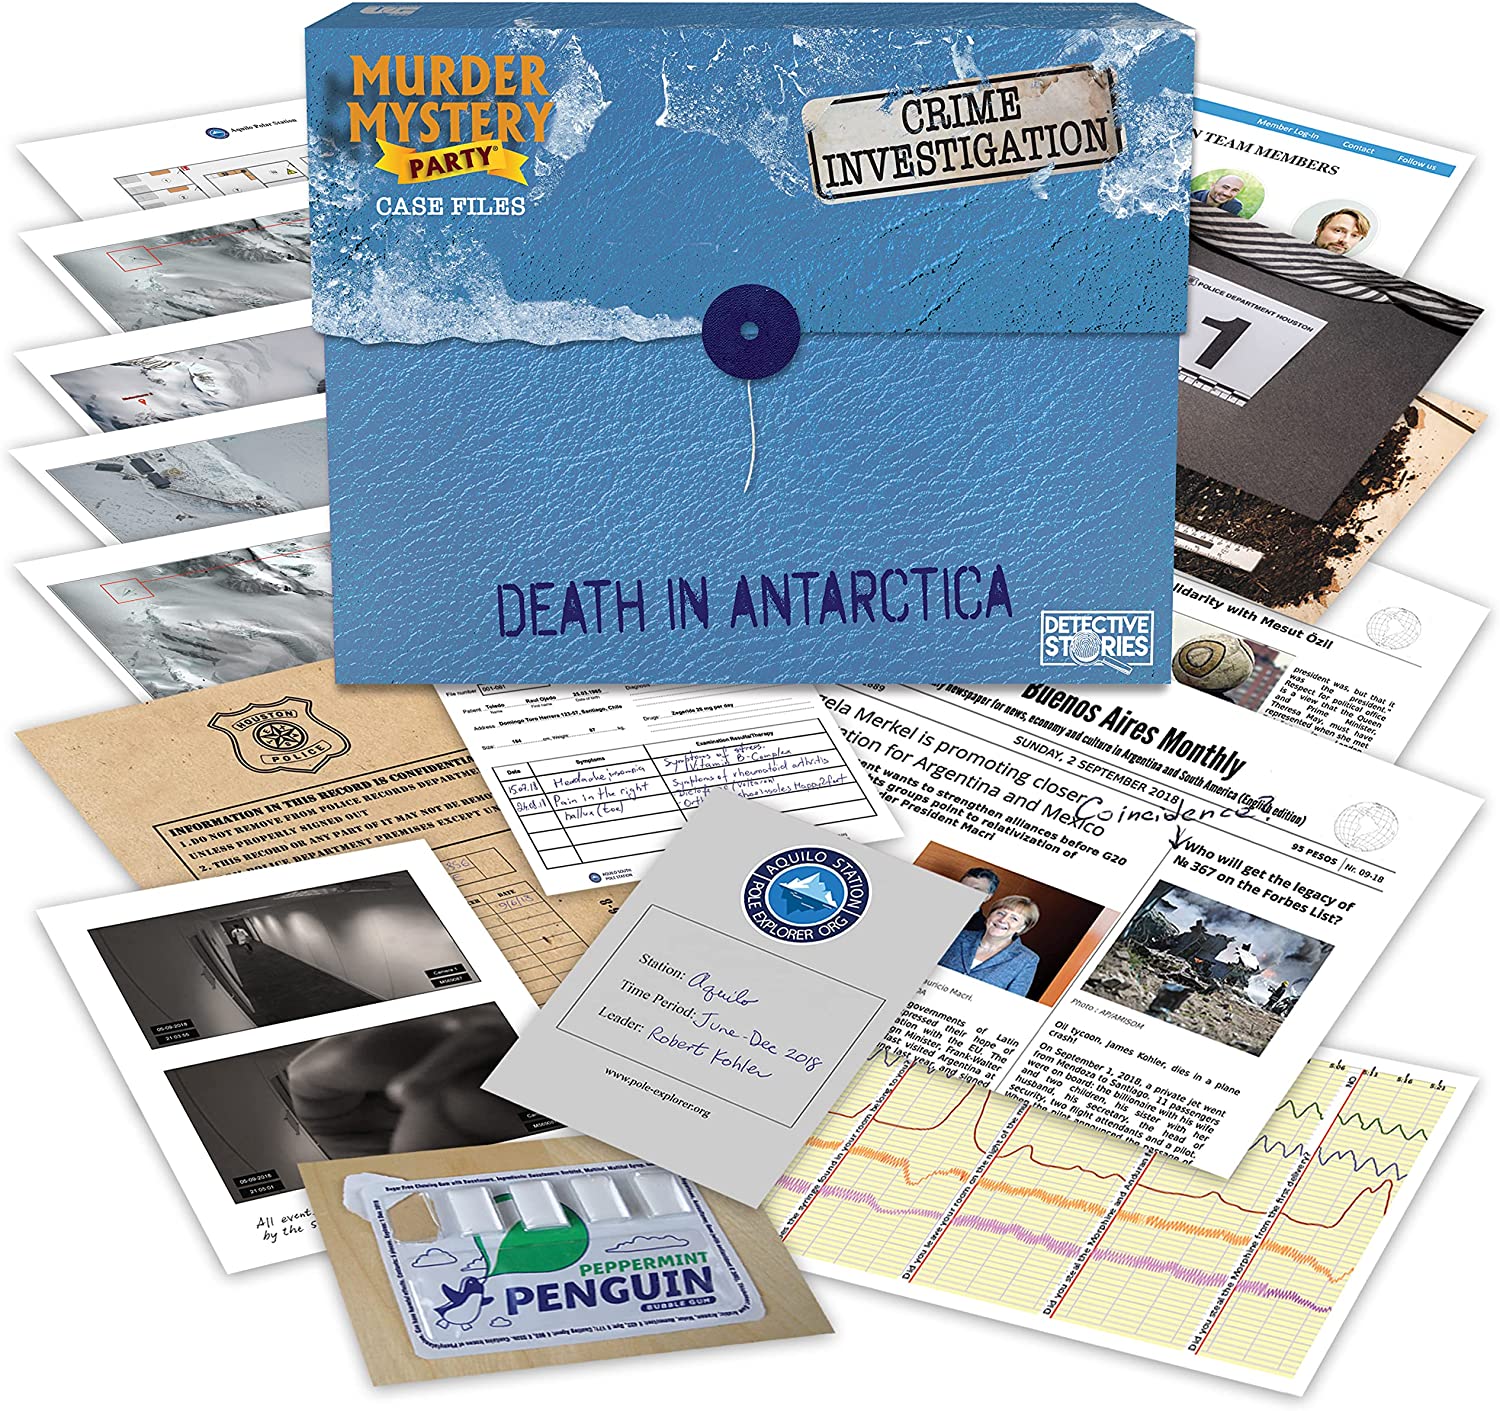 Murder Mystery Party Case Files: Death in Antarctica Mystery Detective Case File Game $11.70 + Free Shipping w/ Amazon Prime or Orders $25+